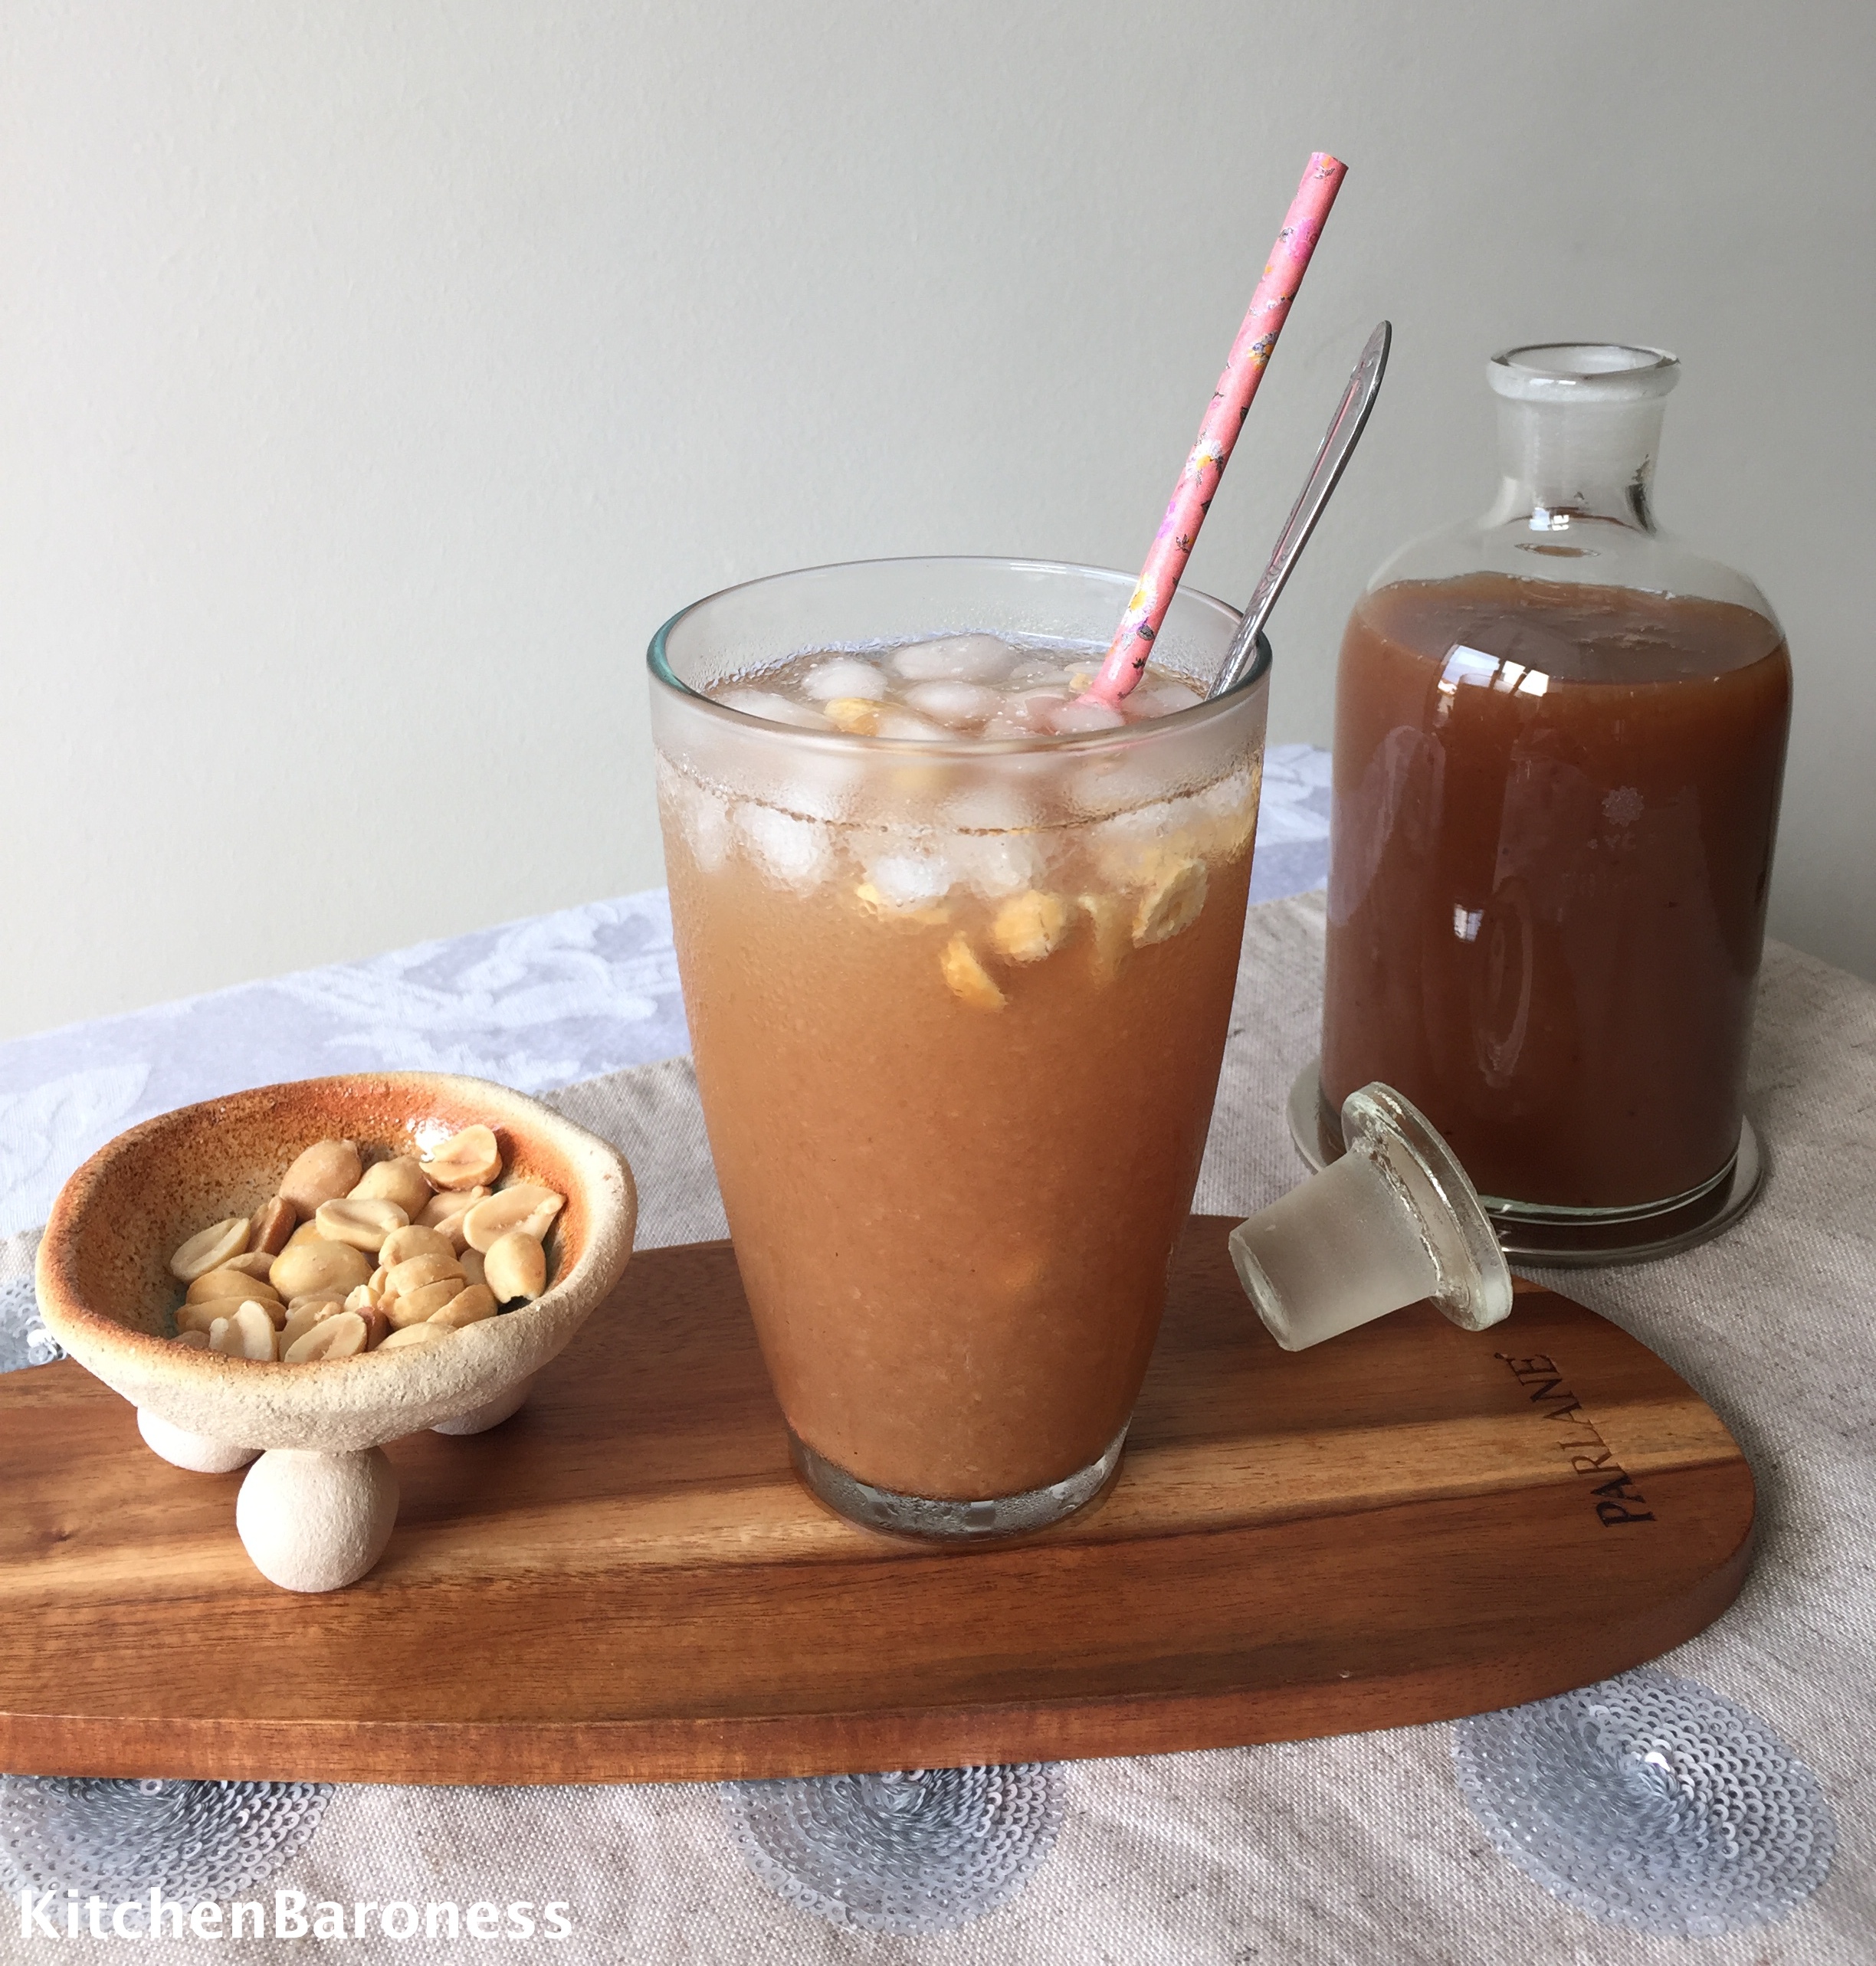 Tamarind Drink With A Spoonful Of Roasted Peanuts Kitchenbaroness